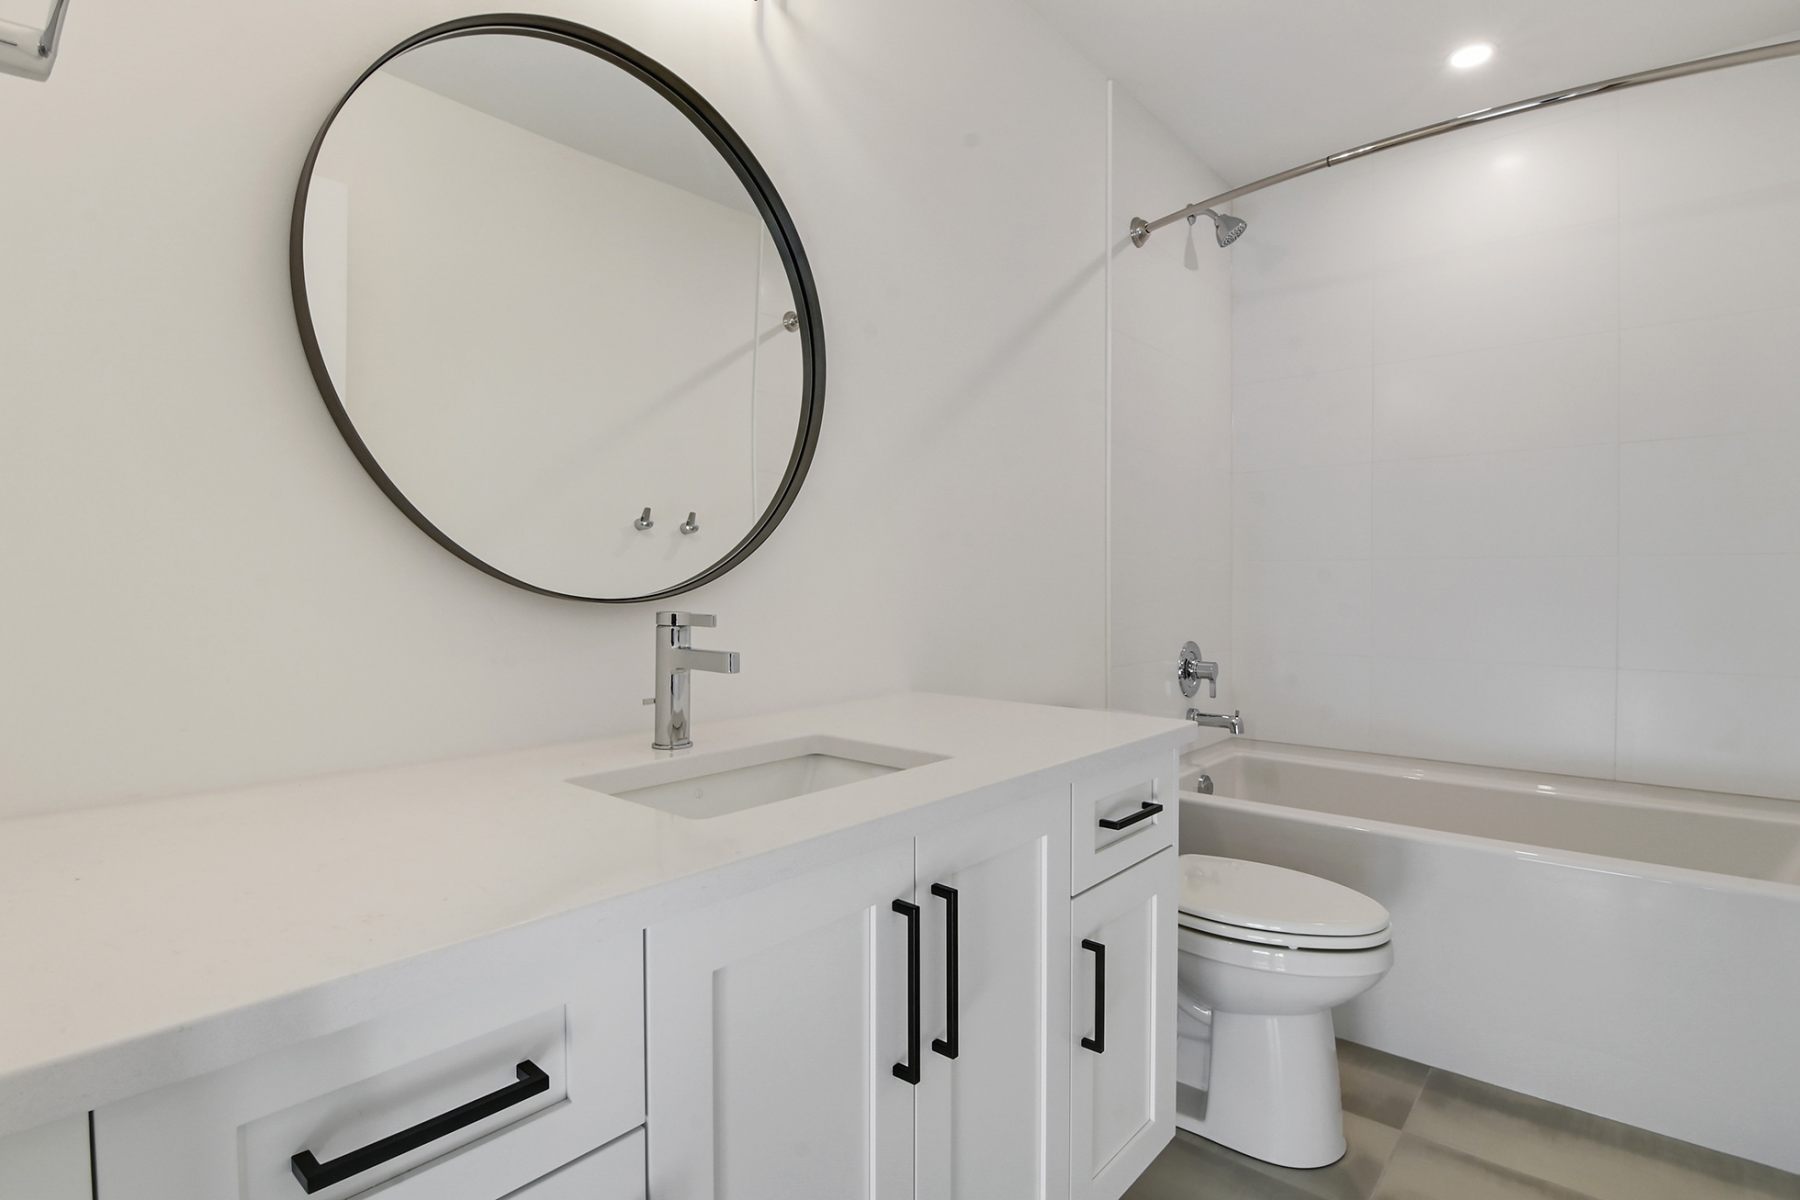 1_harmony_homes_patterson_ave_infill_project_bath_mirror_gallery_image_18